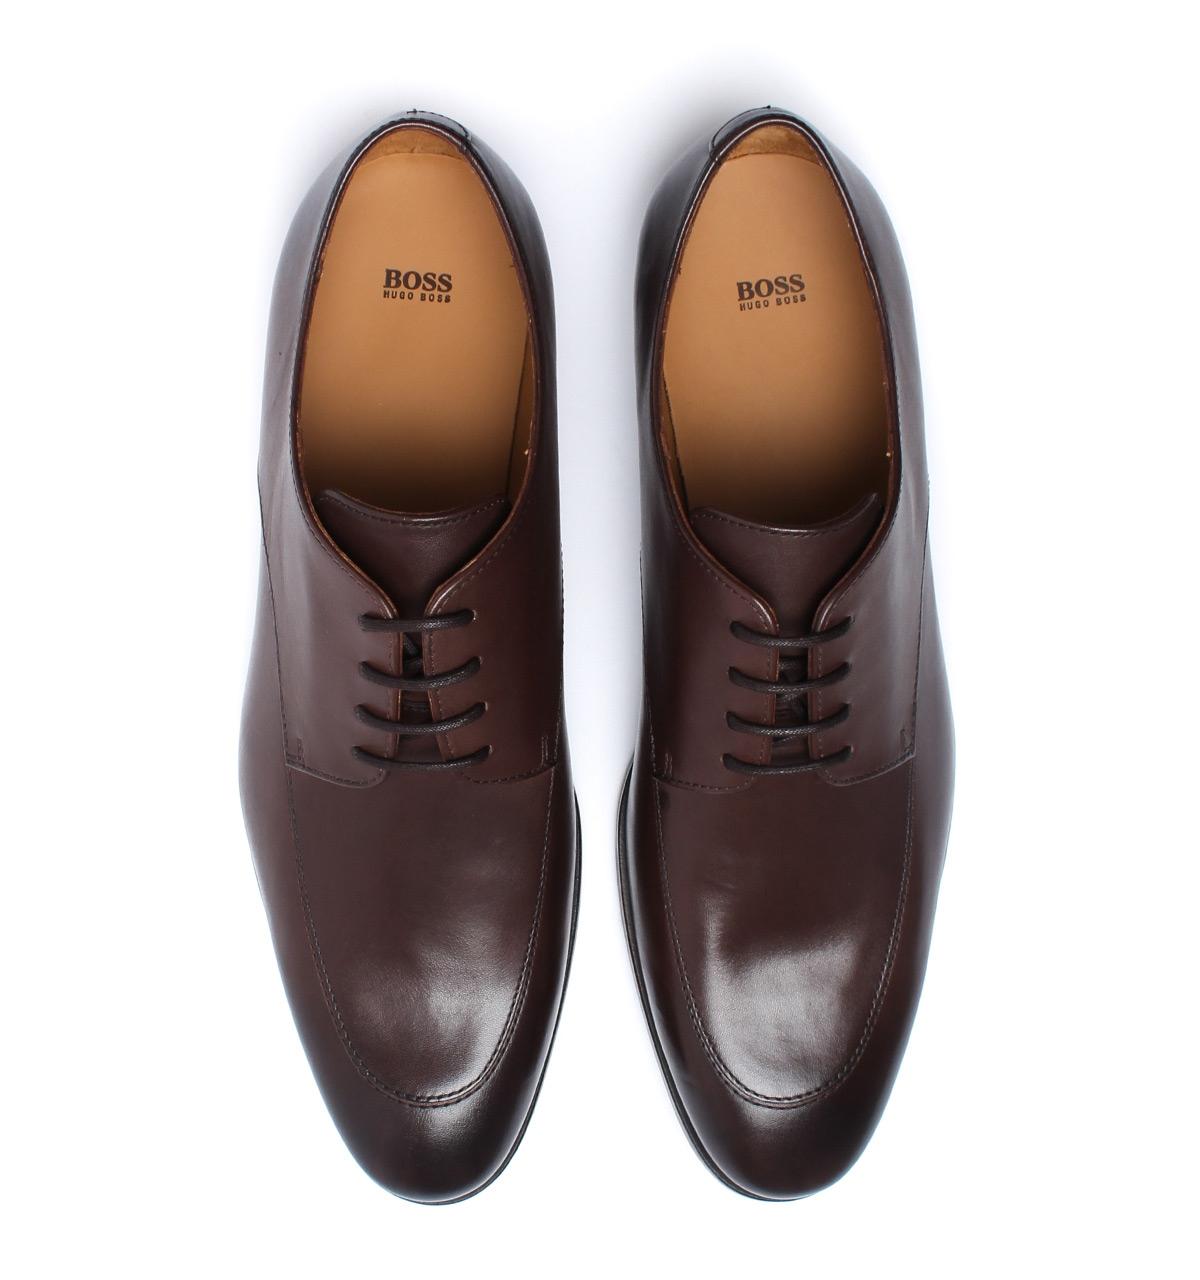 BOSS by HUGO BOSS Hannover Brown Leather Derby Shoes for Men - Lyst